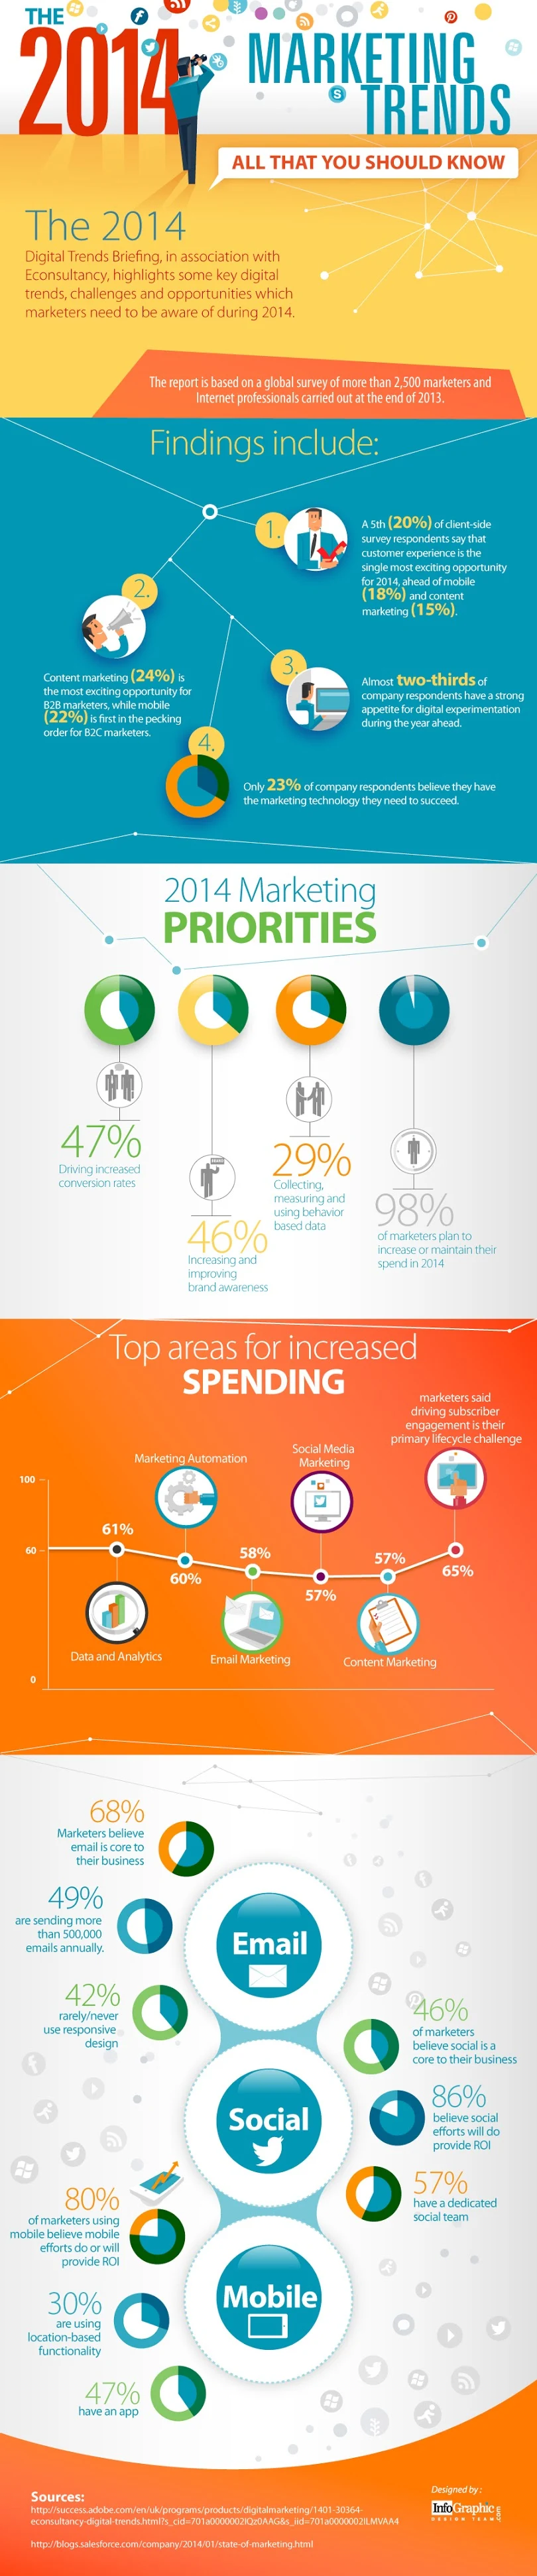 The 2014 Digital Marketing Trends - All That you Should Know - infographic